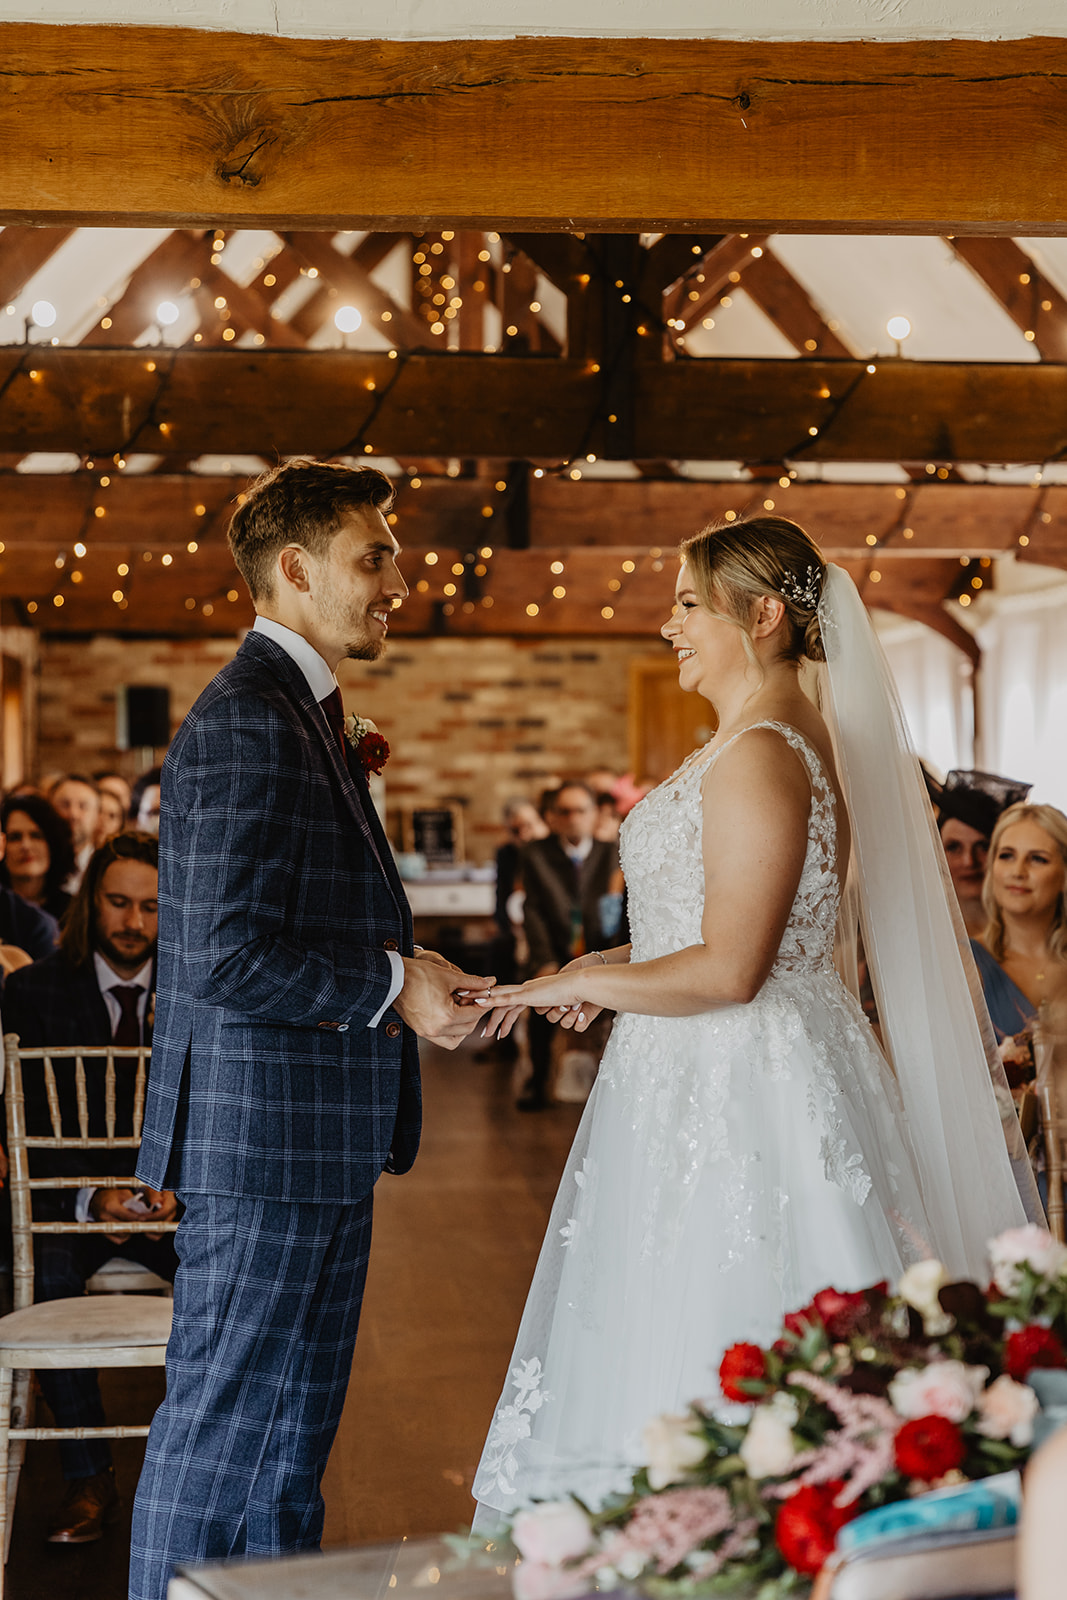 Bride and groom exchange vows at a wedding at Long Furlong Barn, Sussex. By OliveJoy Photography.